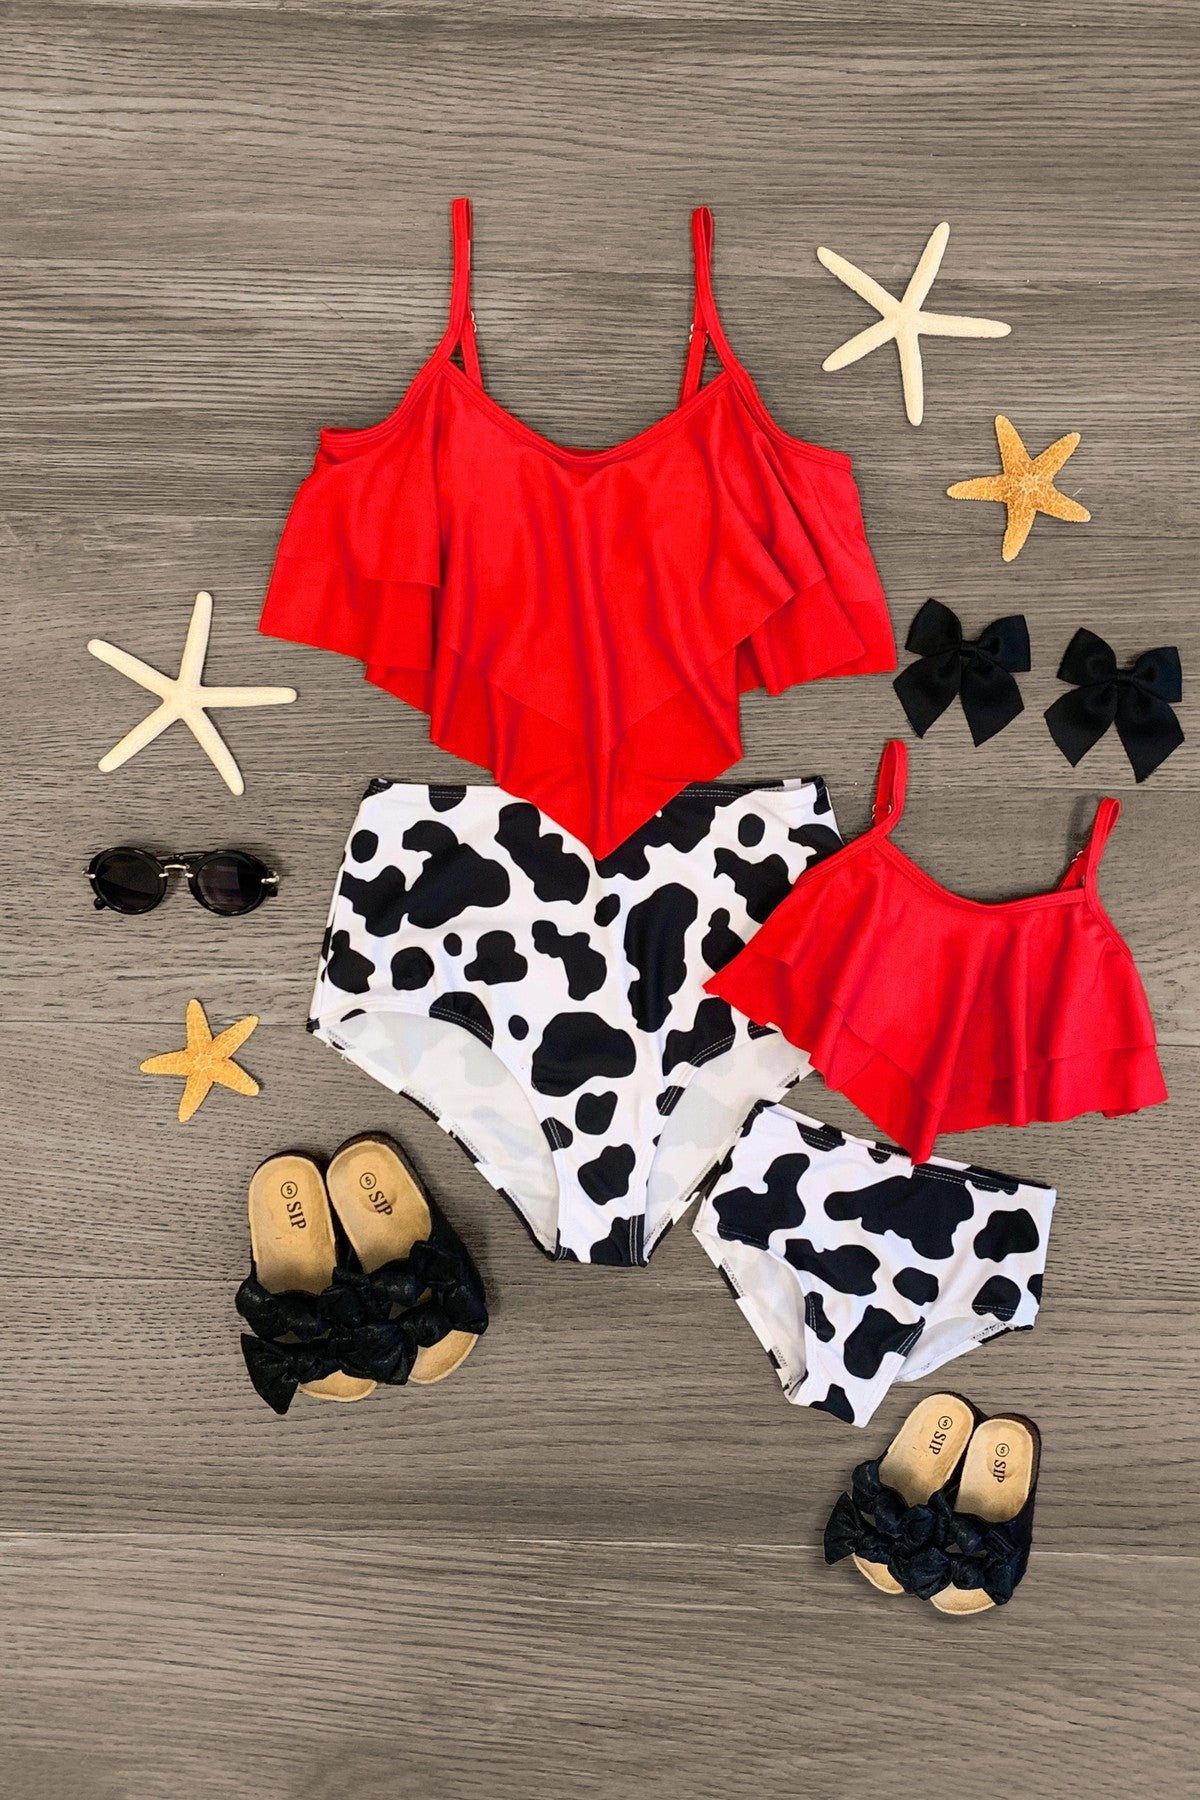 Mom & Me - Red and Cow Print Bikini - Sparkle in Pink